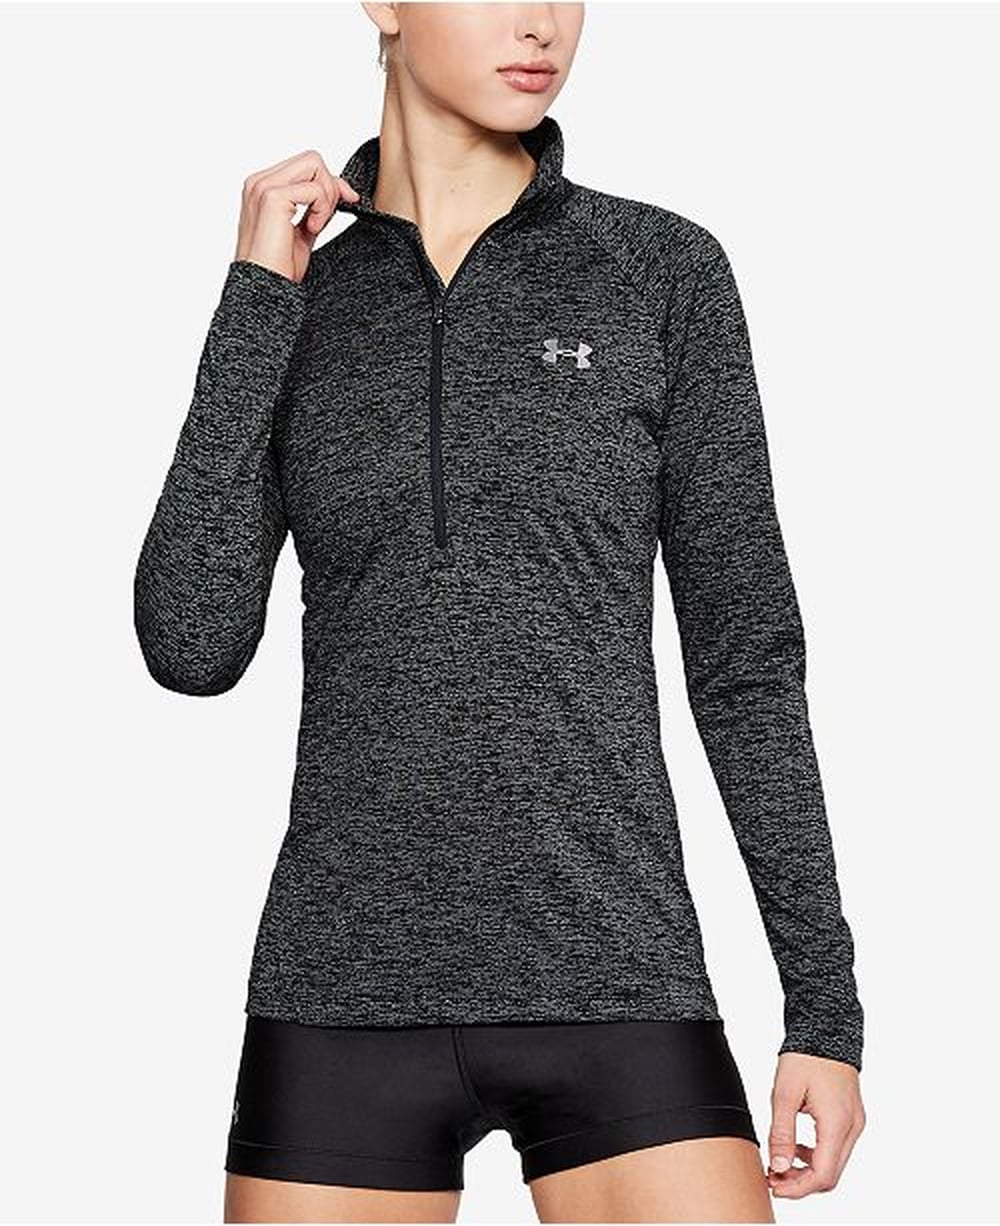 The Best Workout Clothes From Macy's | POPSUGAR Fitness